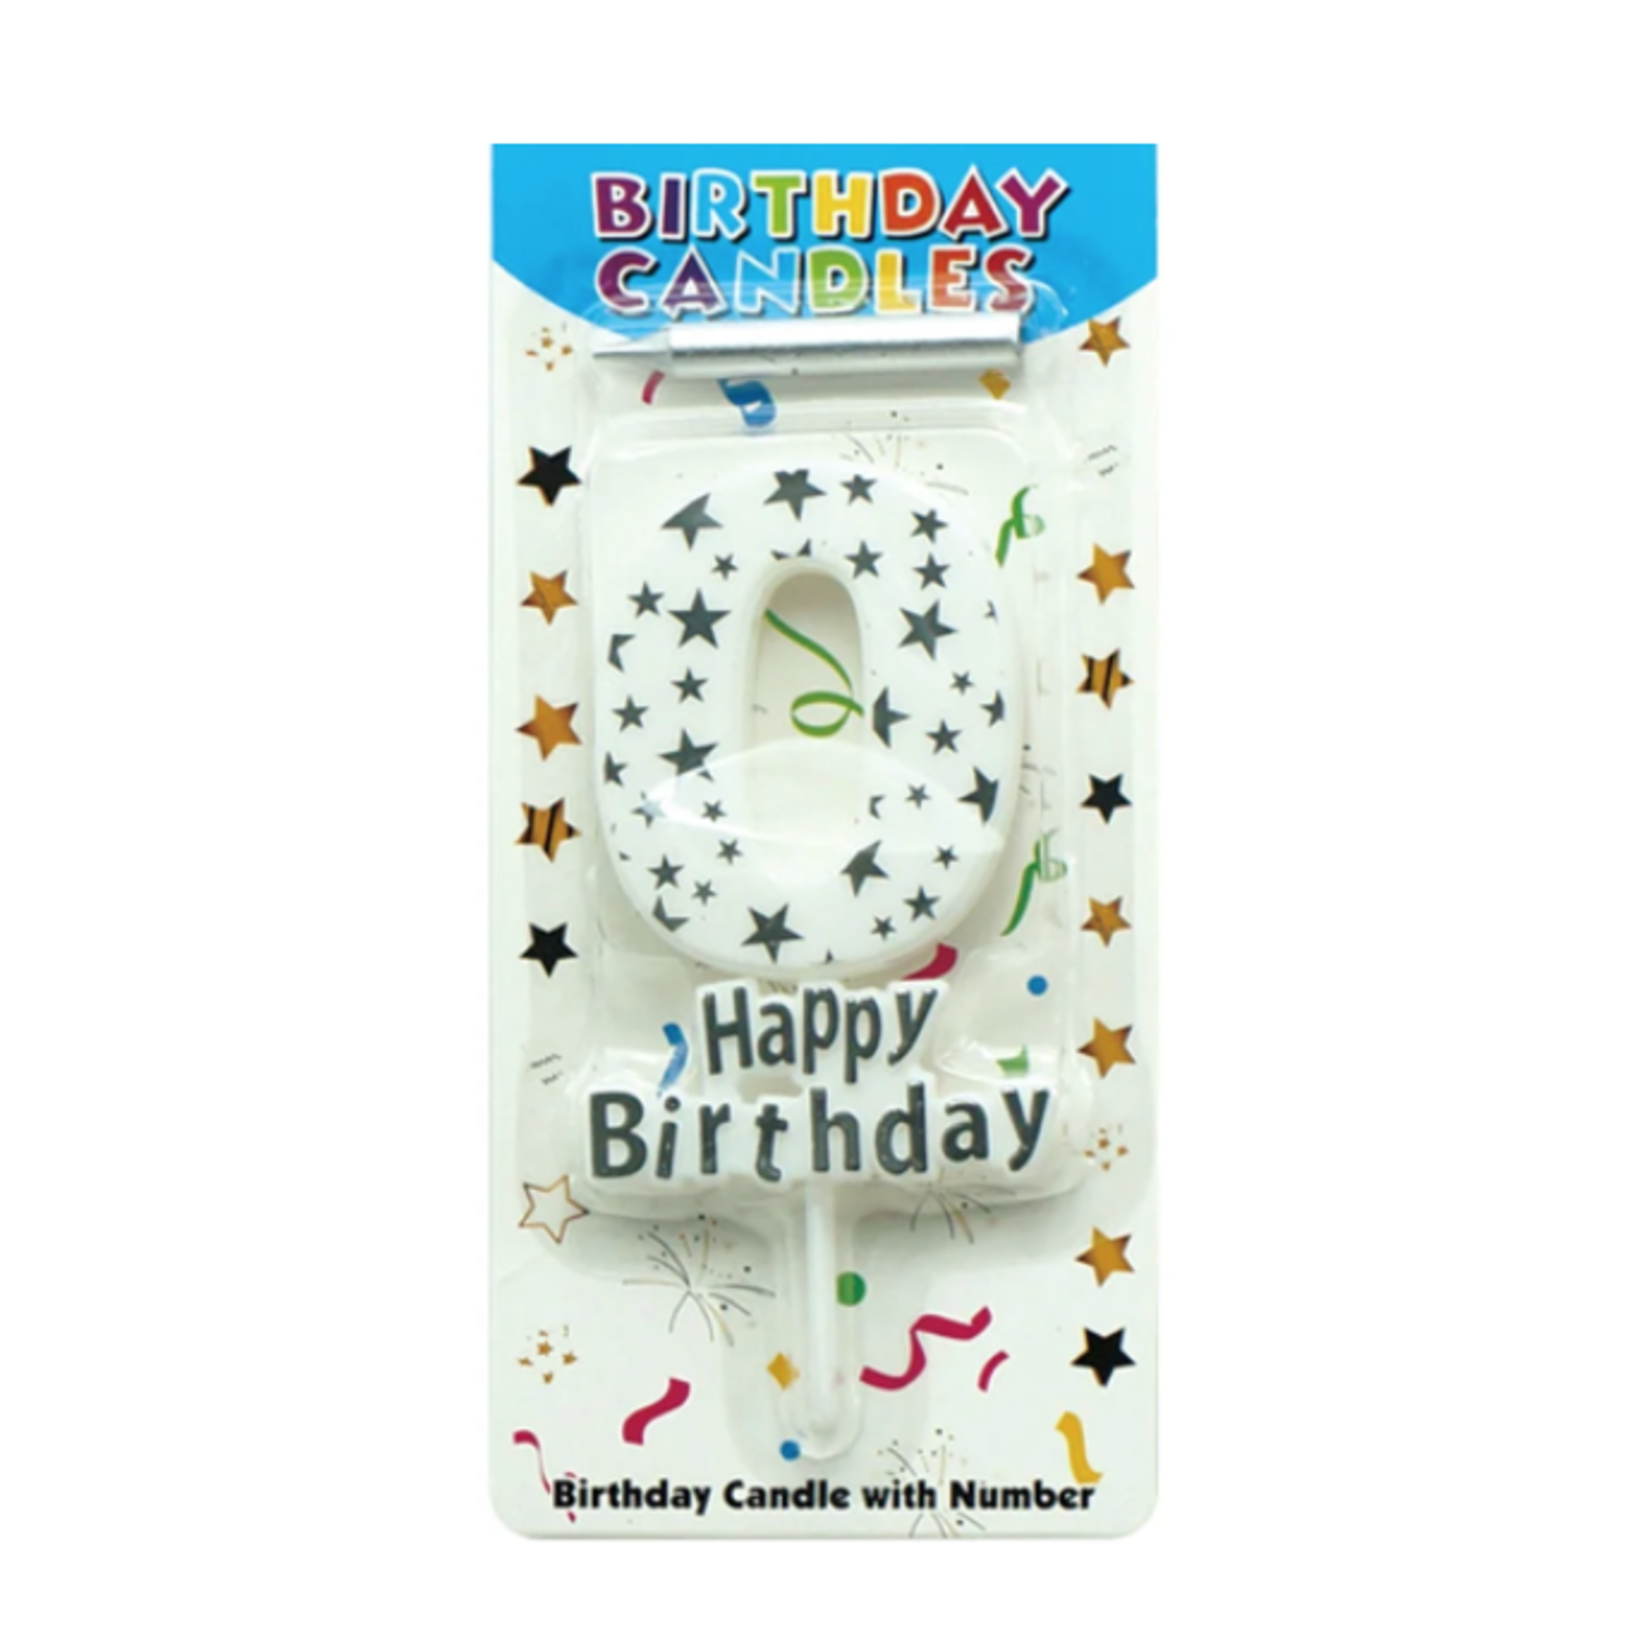 HAPPY BIRTHDAY CANDLE, SILVER #0